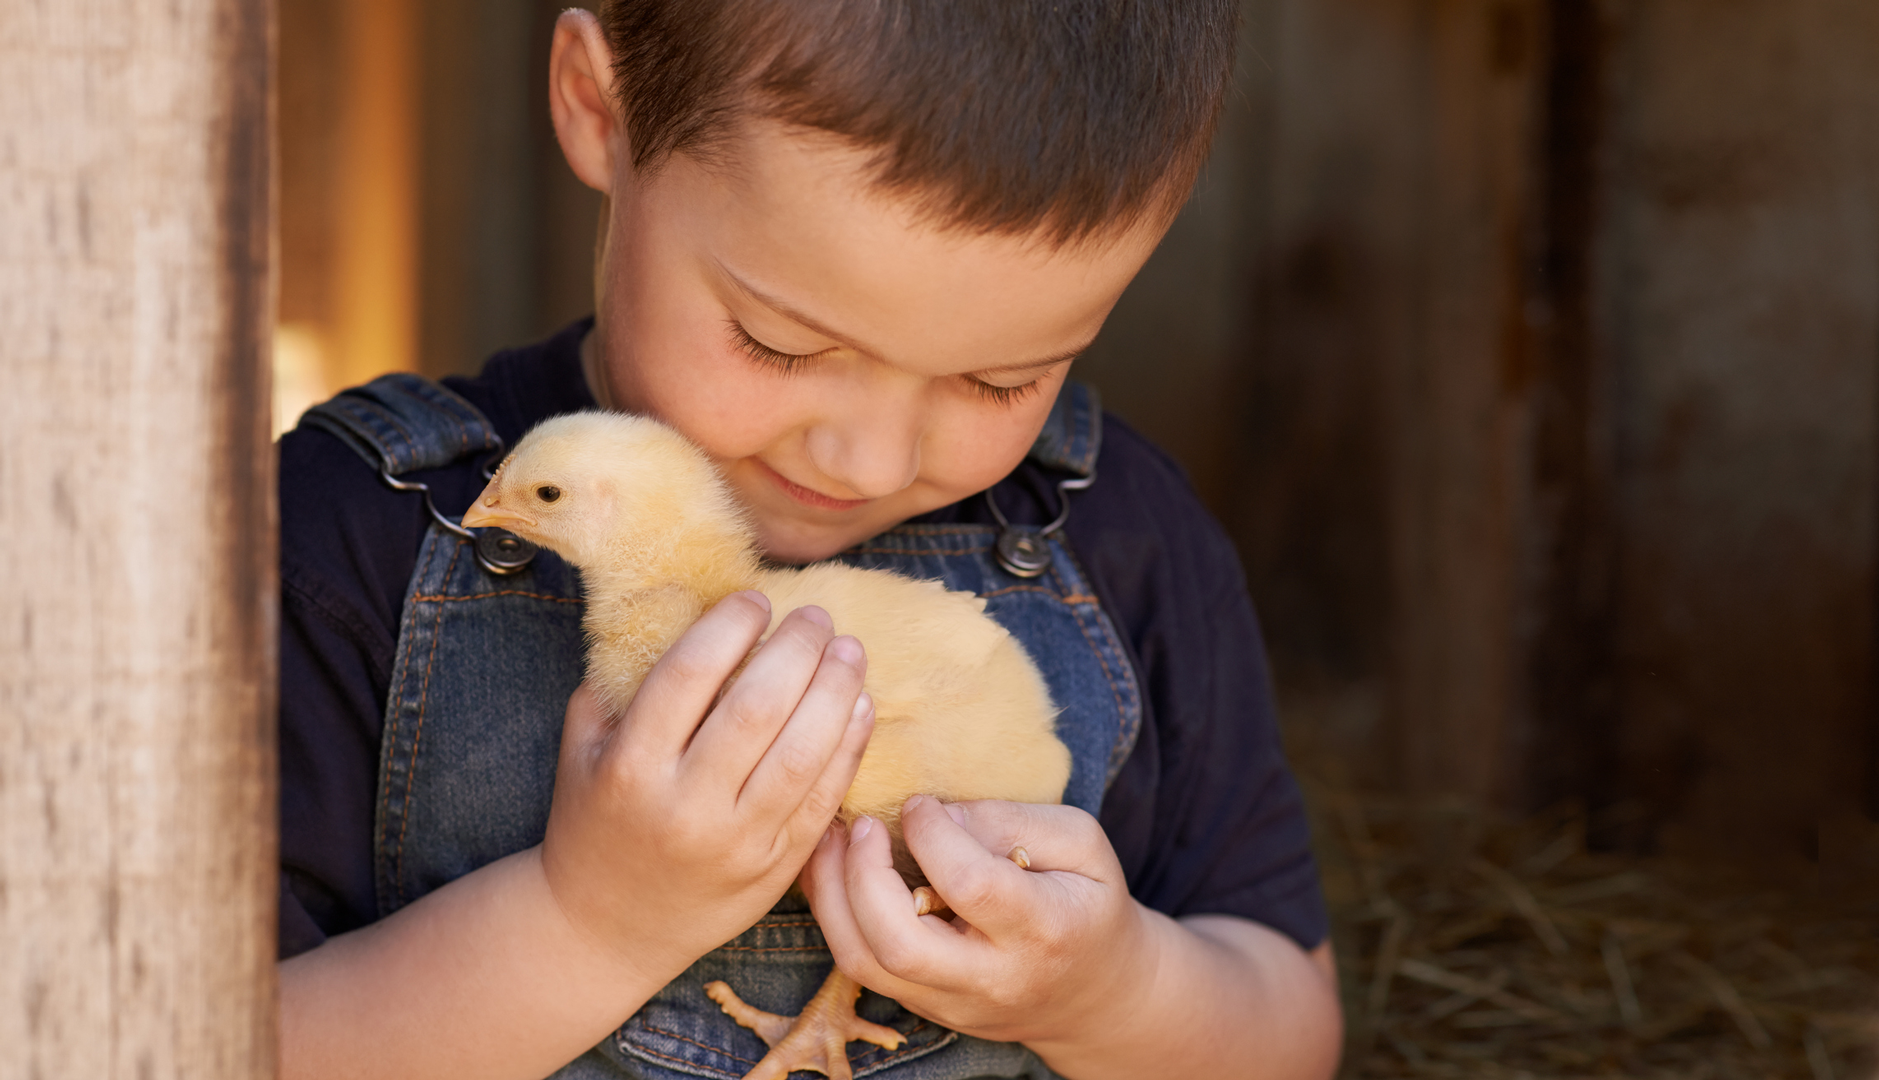 Child holding baby chick